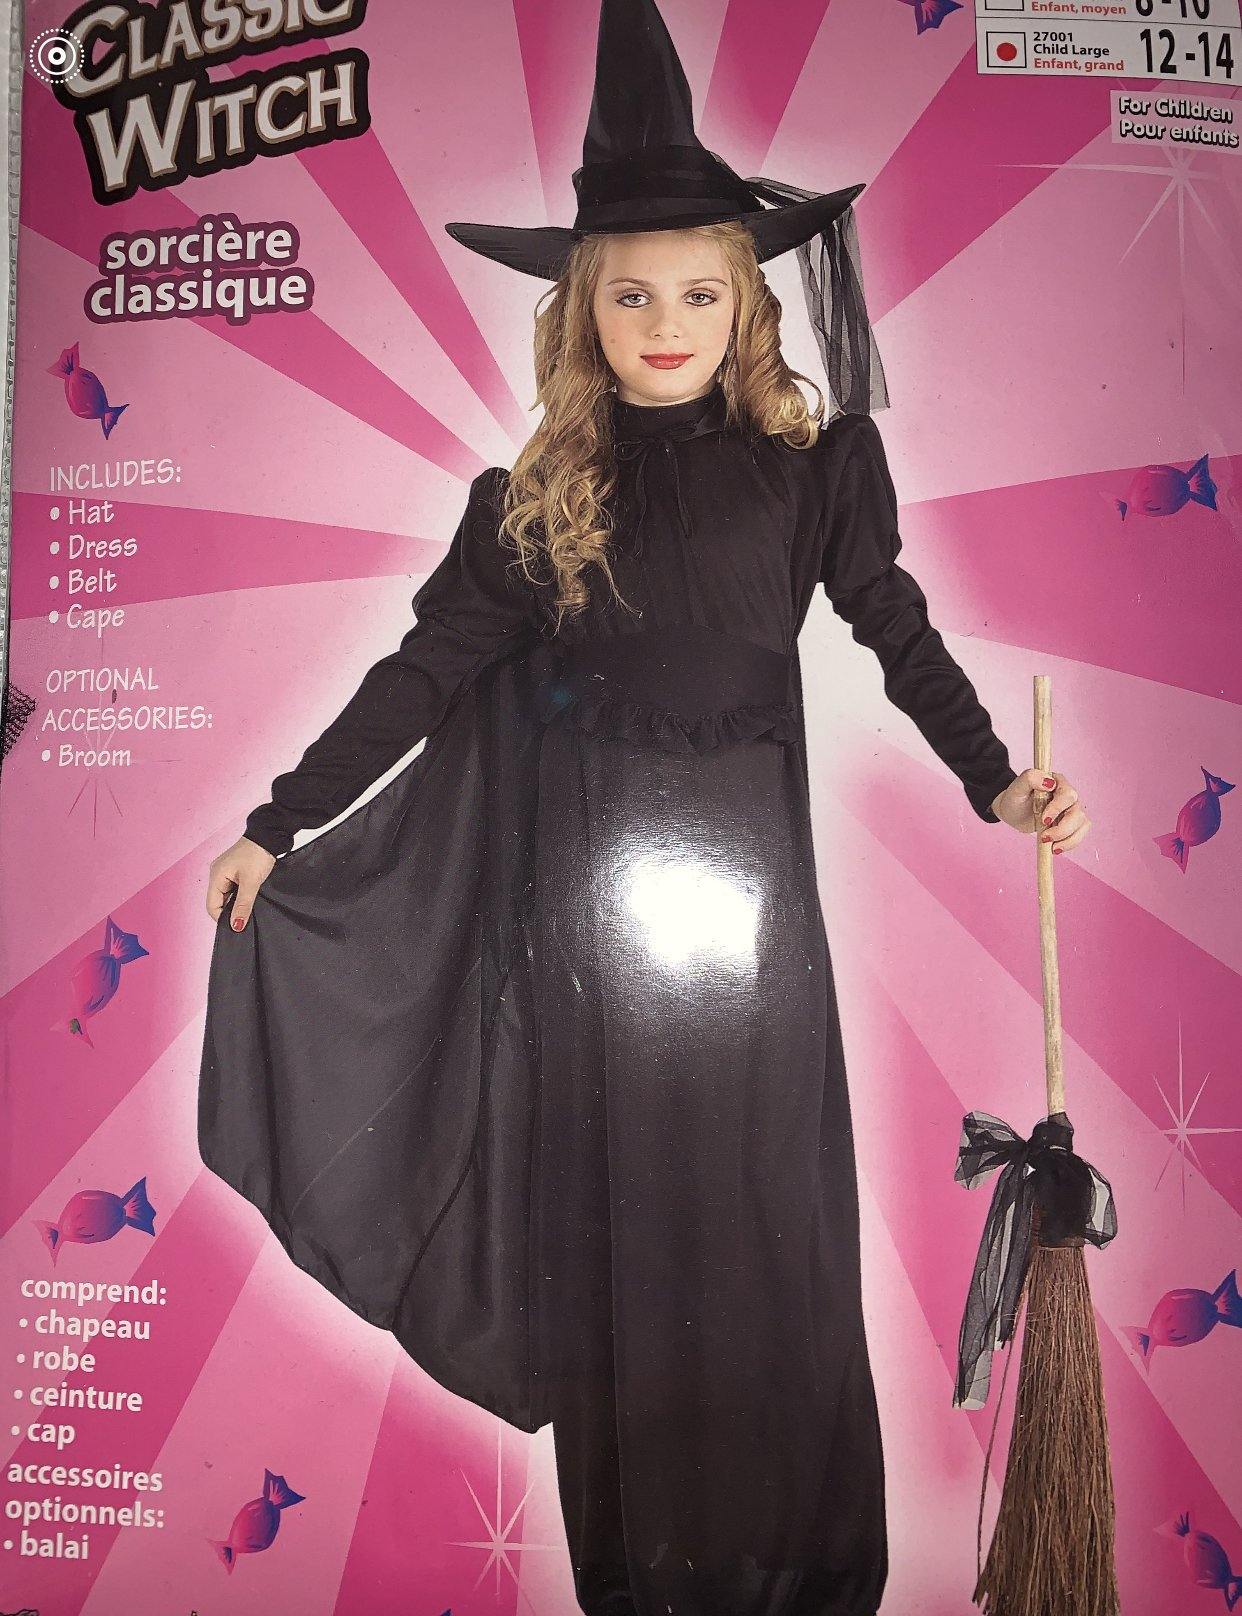 Classic Witch Costume -Child Large (12-14)